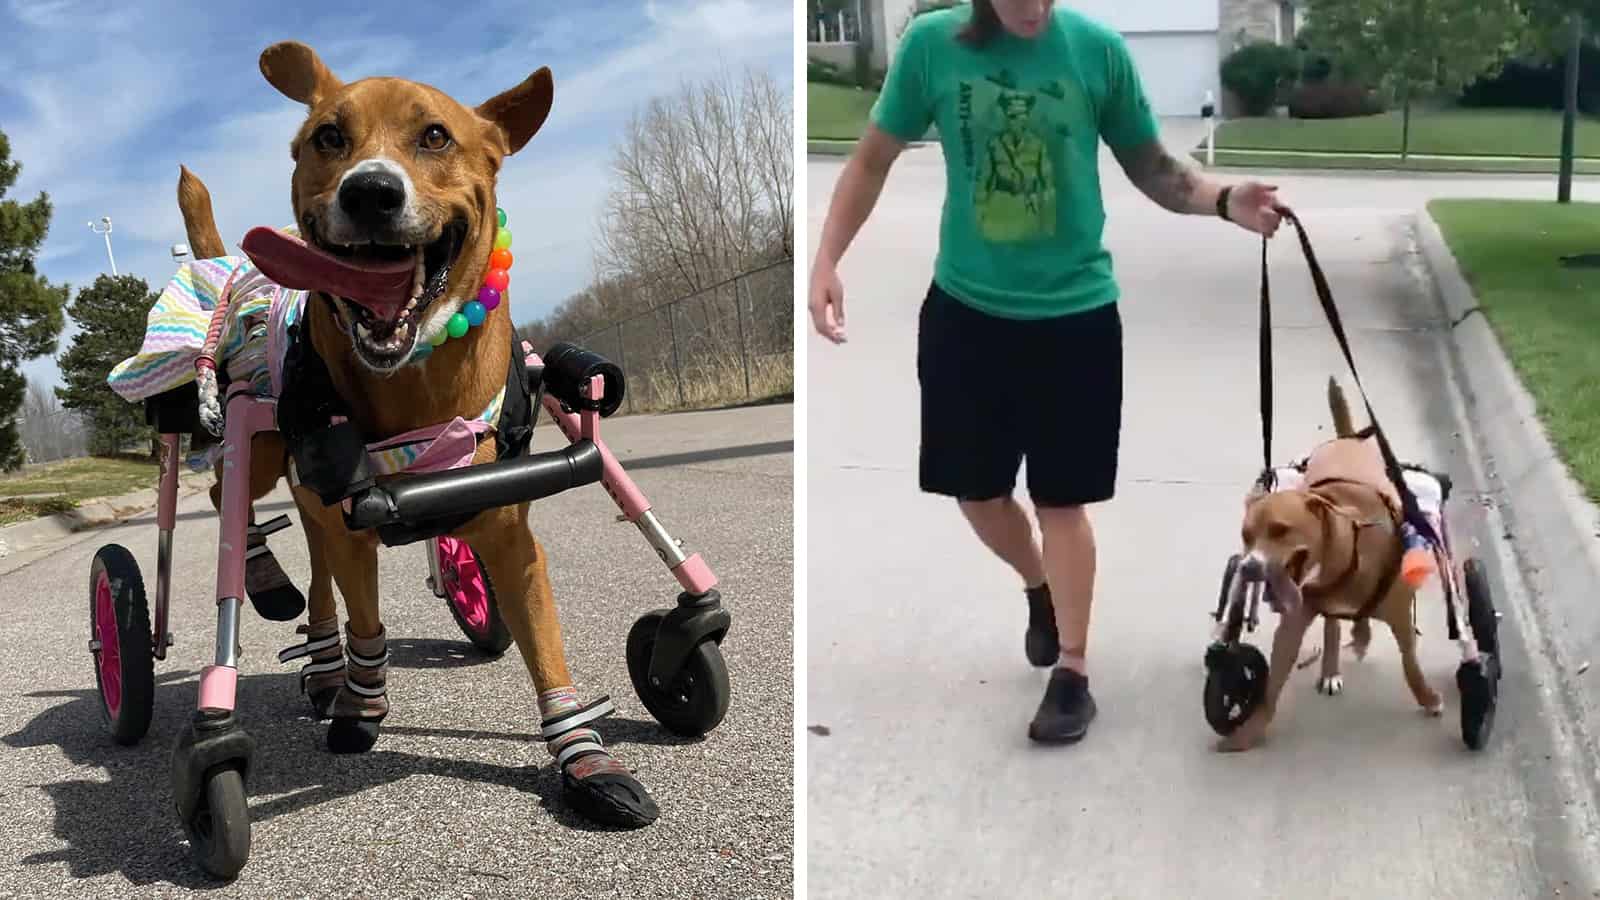 Special Needs Dog Learns to Use a Wheelchair, Leads a Happy Life